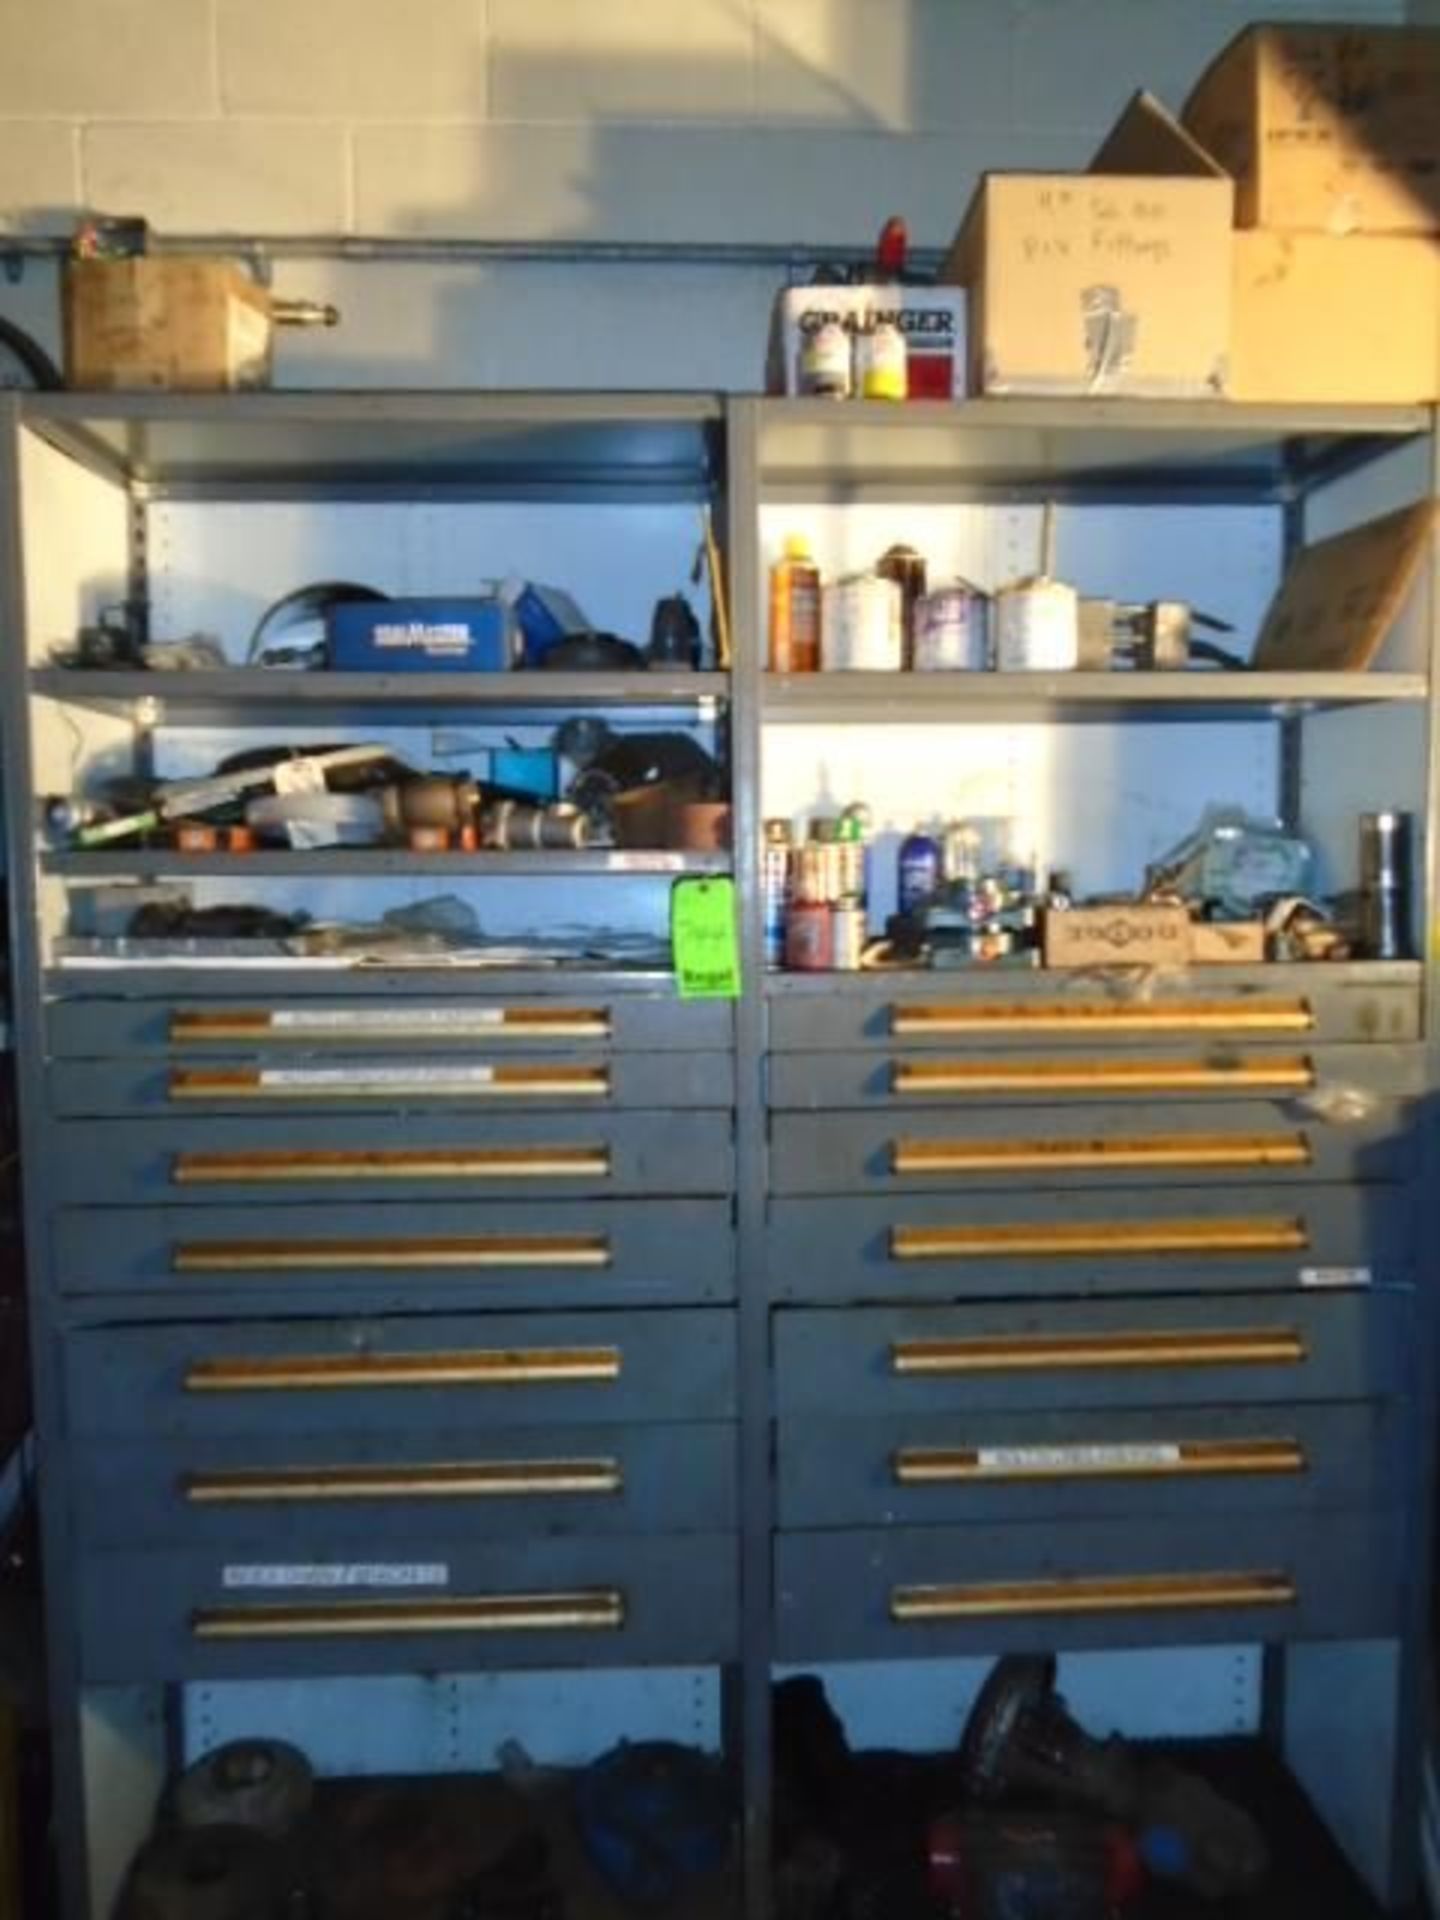 Shelves and Drawers and Contents( Assorted Part, Nuts, Bolts)